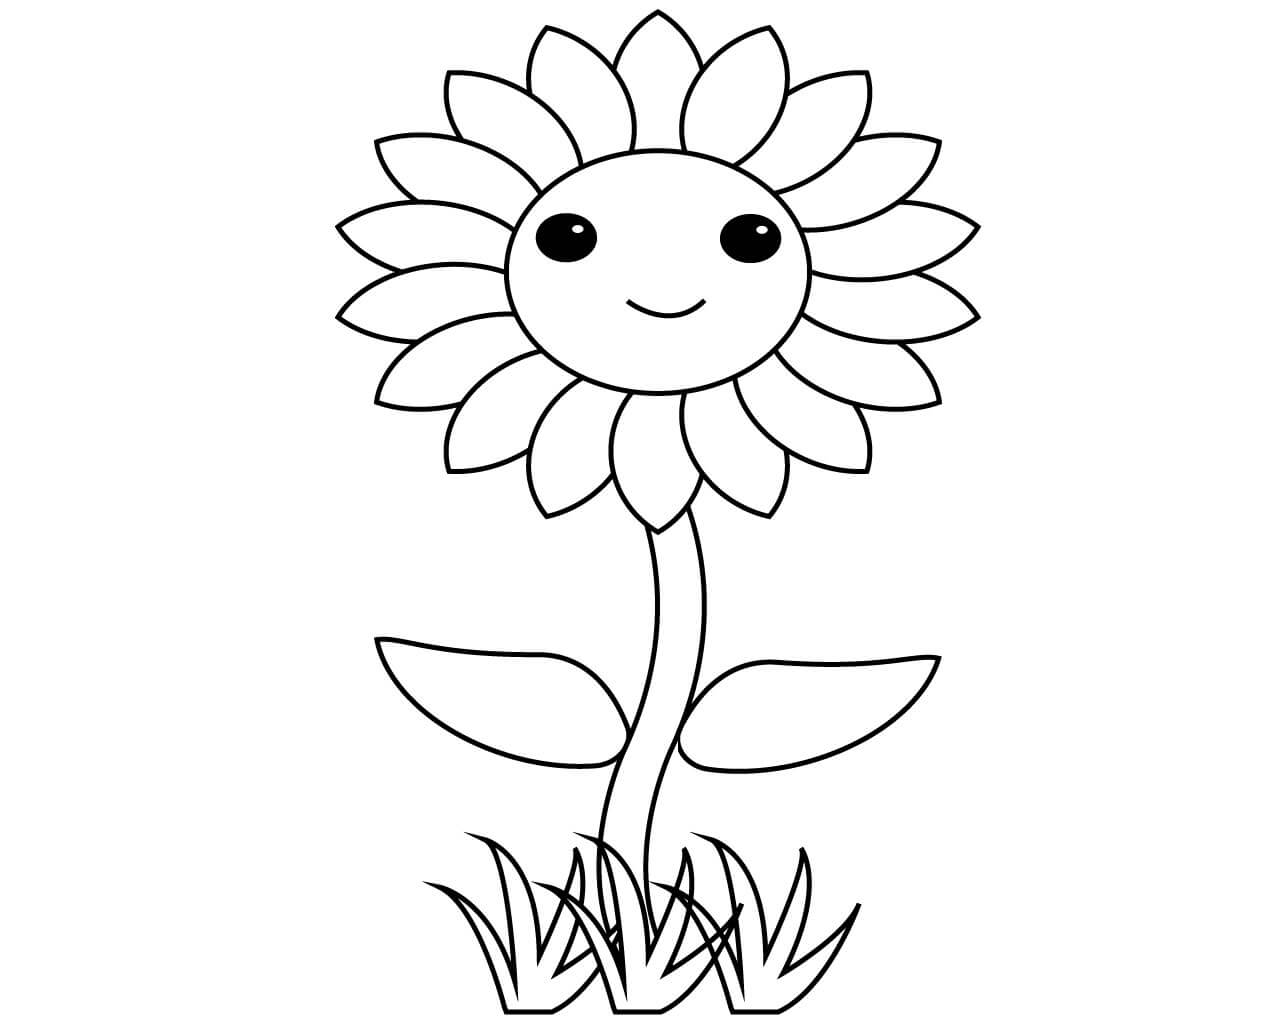 Smiling Flower with Grass